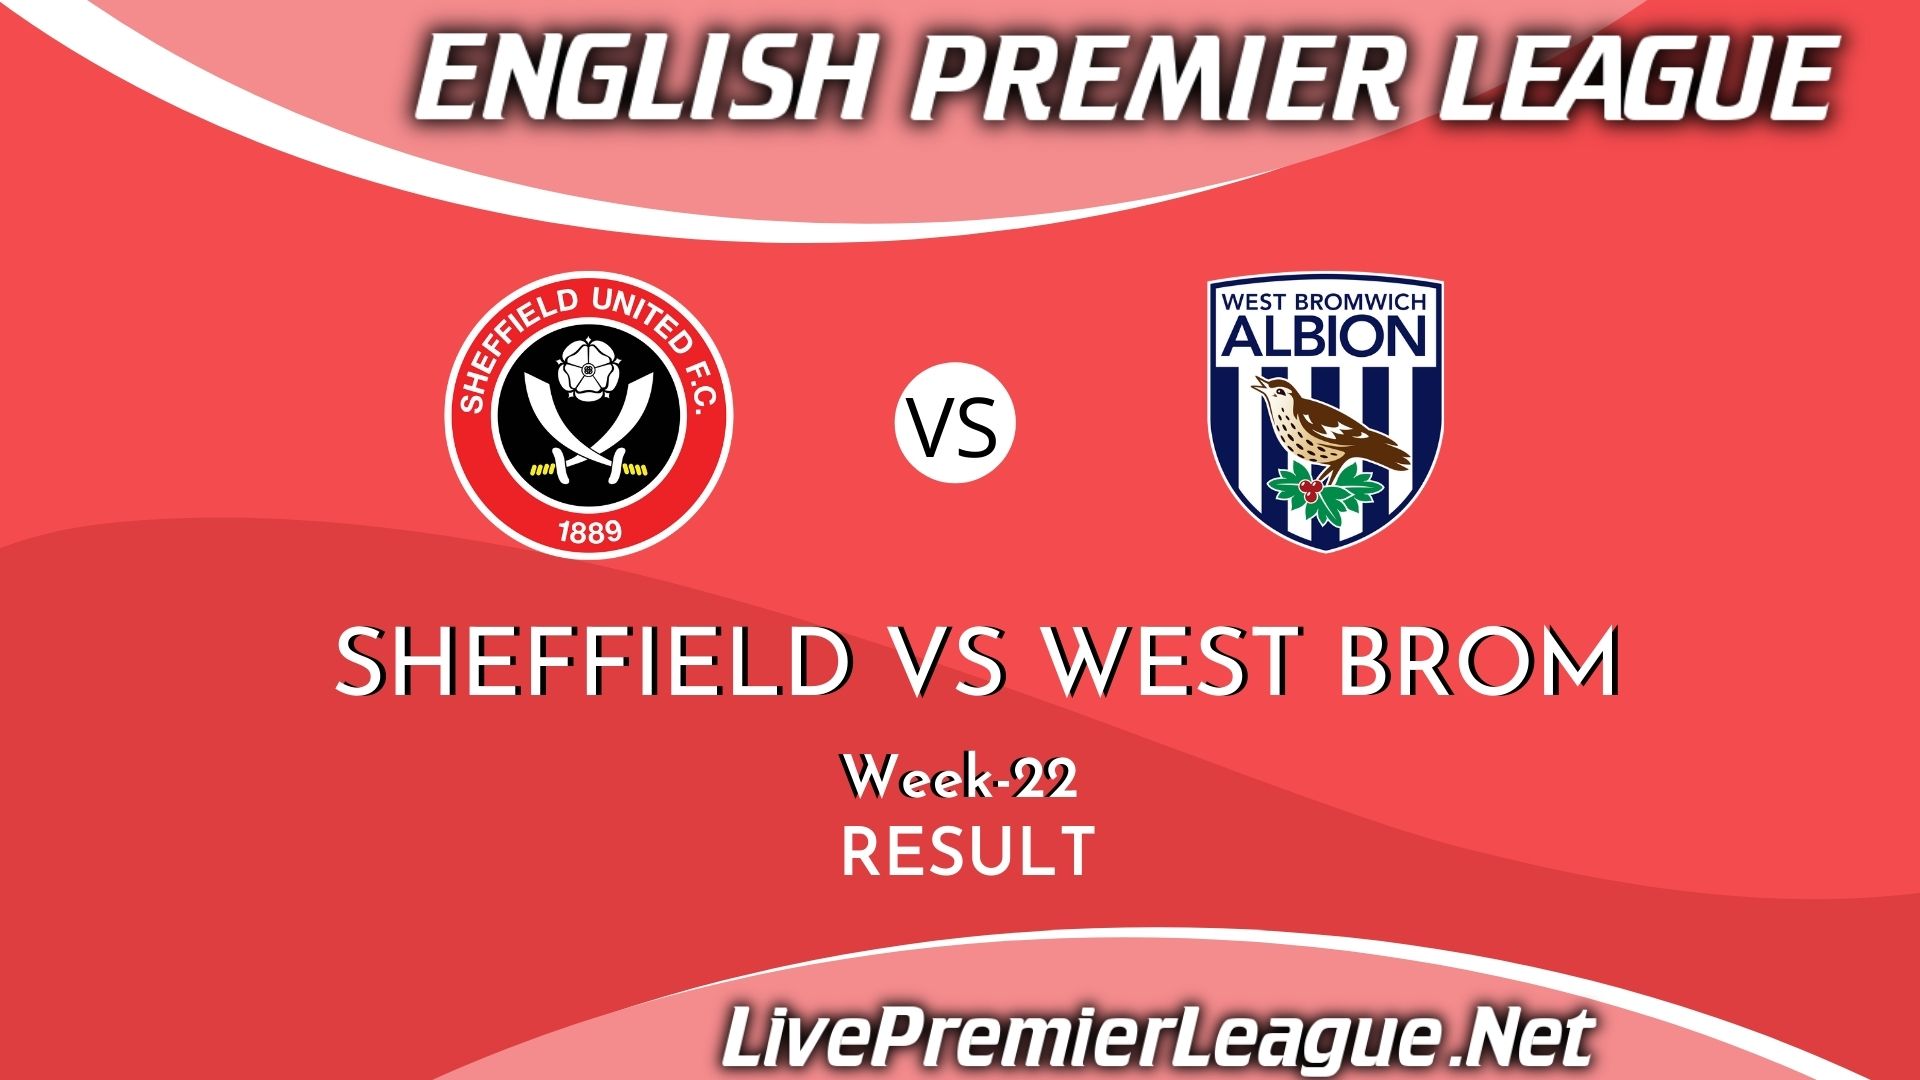 Sheffield United Vs West Bromwich Albion | Result 2021 EPL Week 22